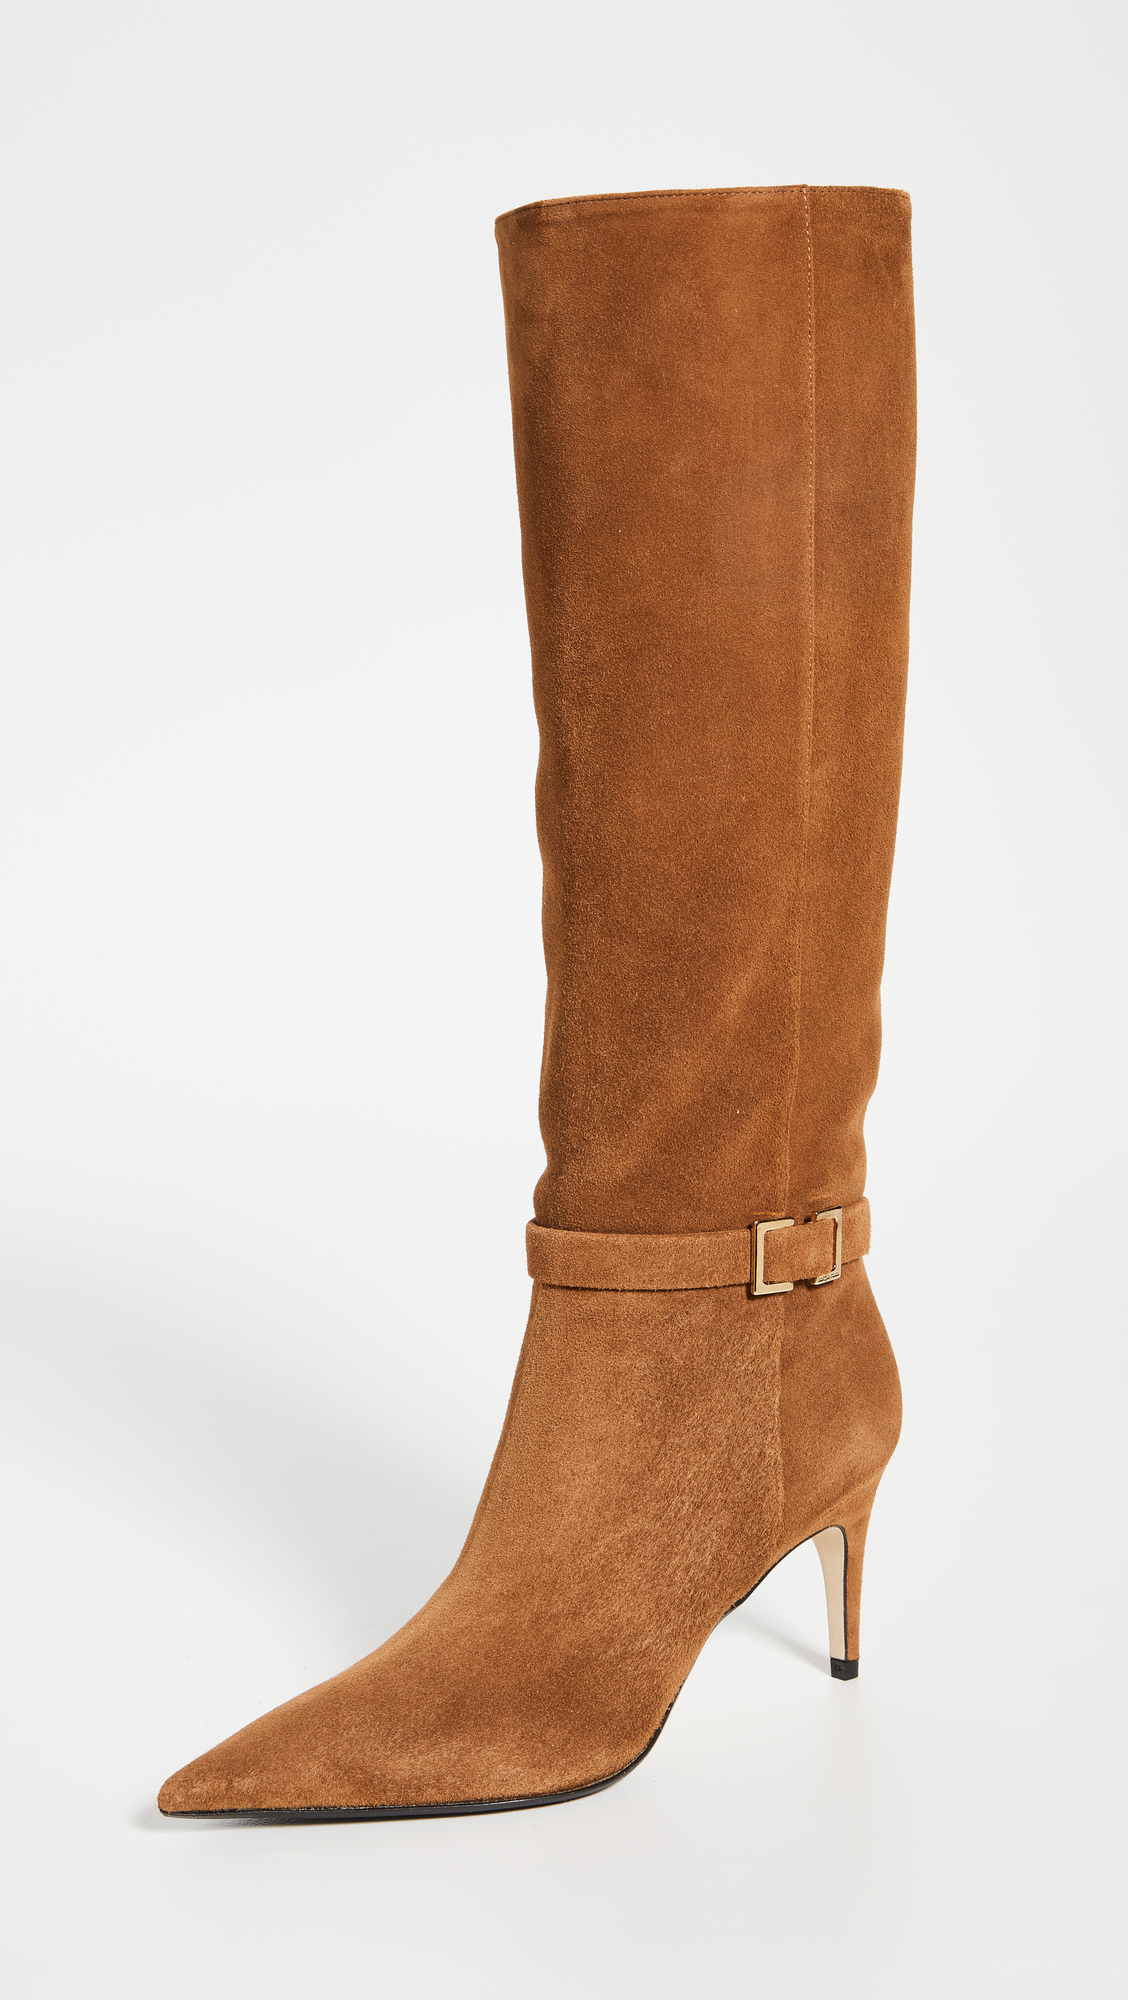 The 29 Best Suede Boots for Women in 